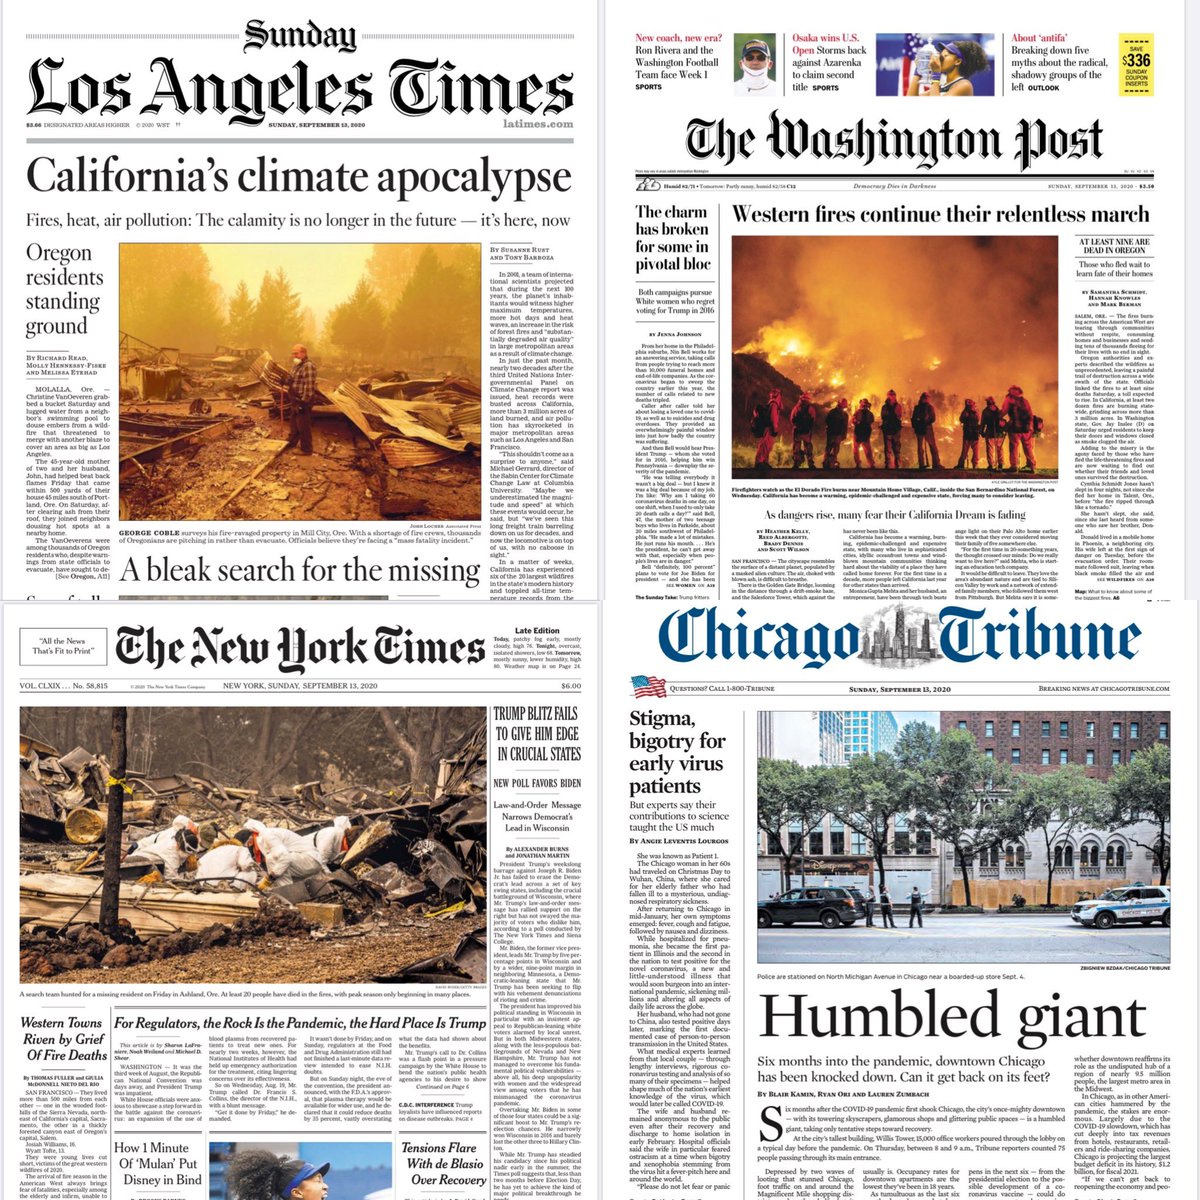 Chetan Bhattacharji Auf Twitter Short Thread On Climatechange Impact On Last Sunday S Front Pages Worldwide Big Change Direct Attribution Of California Disaster To Cc No Change Biggest Headlines From Press Closest To Fires Headlines